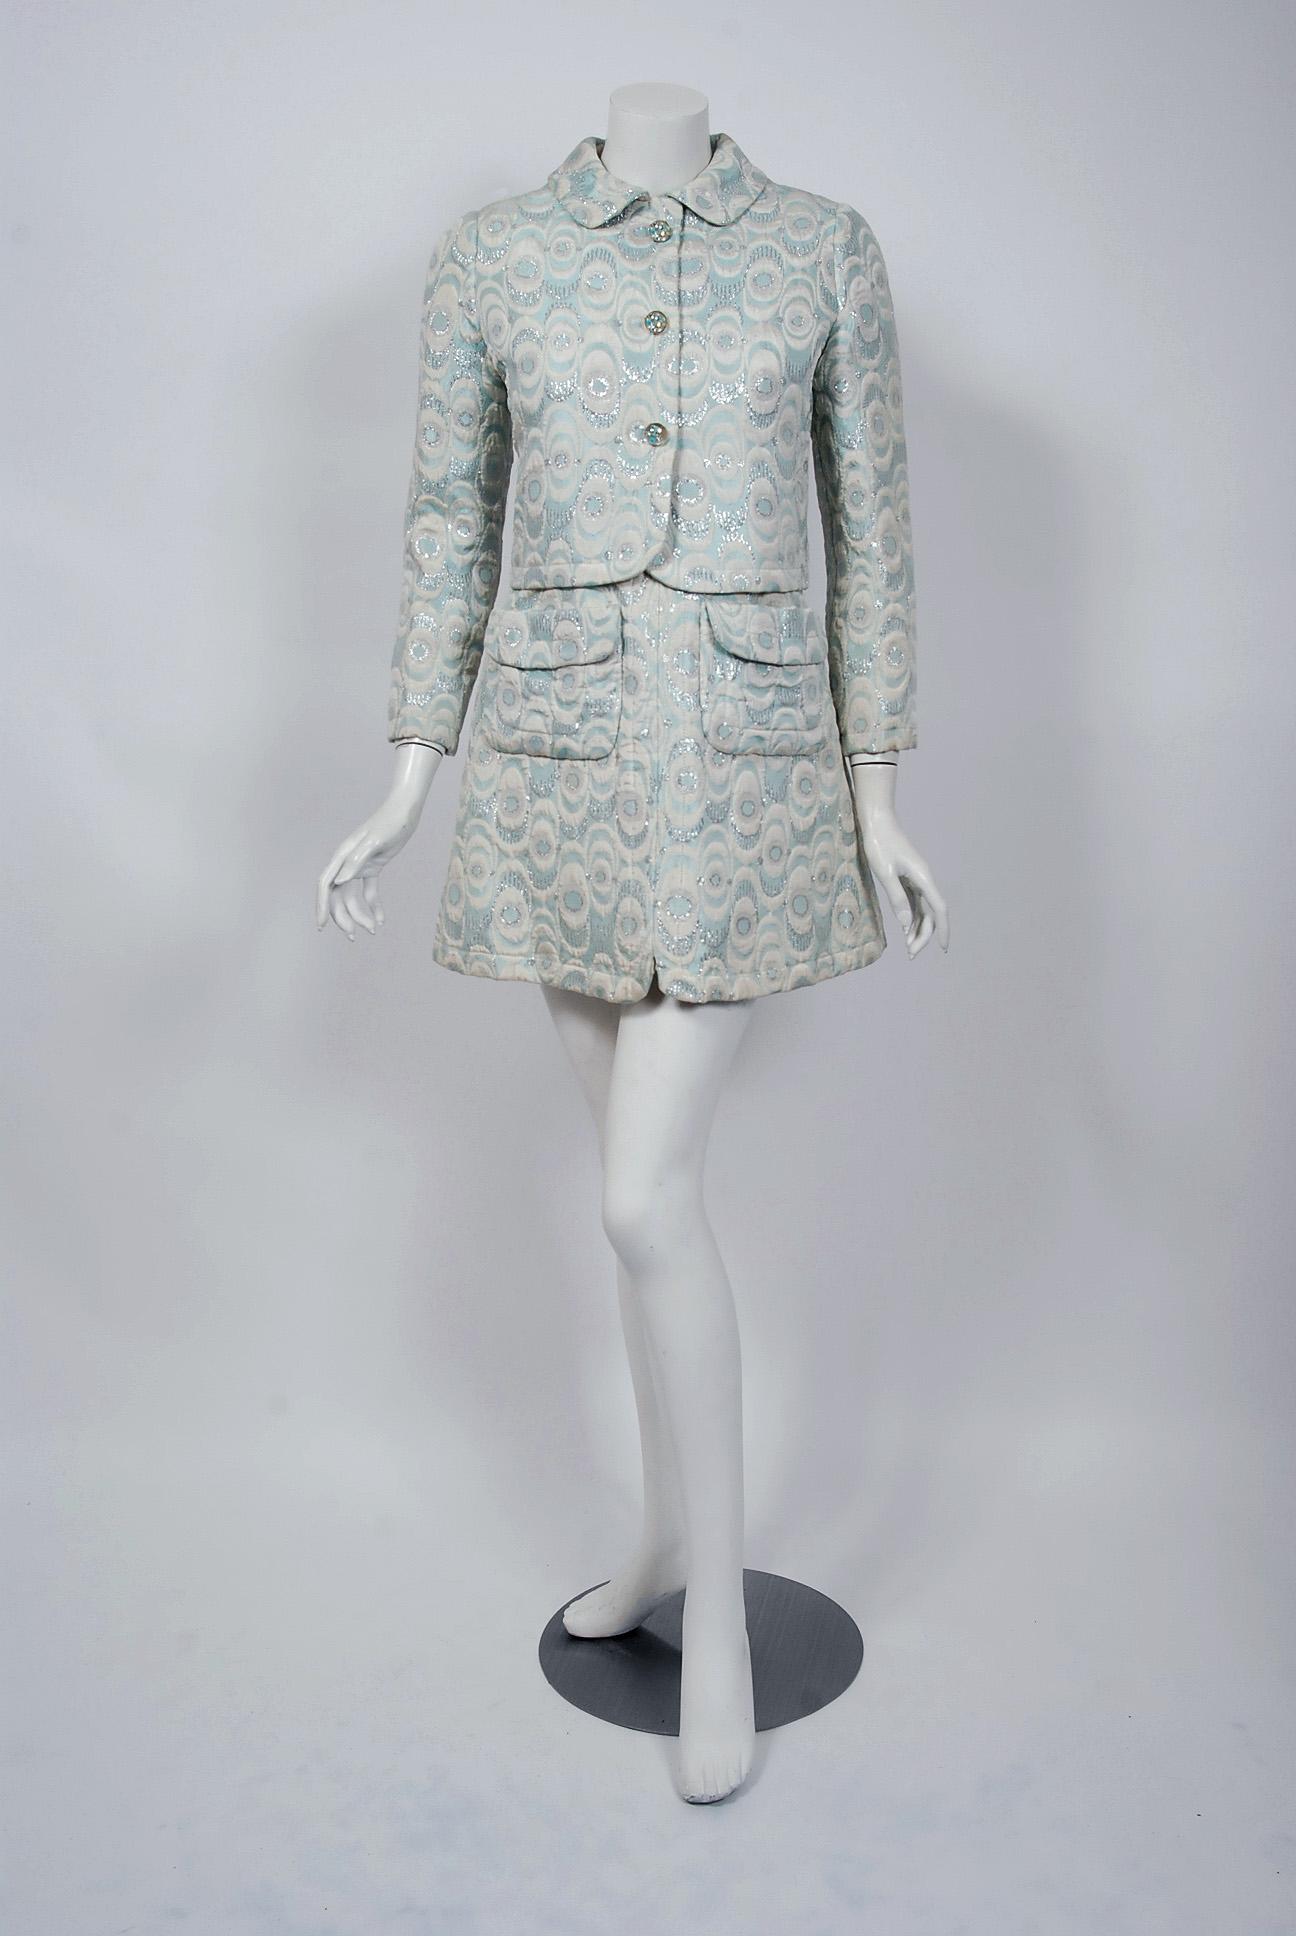 Gorgeous Jean Patou by Michel Goma Paris boutique ensemble dating back to the mid 1960's. This rare dress and jacket read so fresh and modern. The fabric alone is a masterpiece; rich fully-lined metallic light-blue, silver and ivory silk brocade in